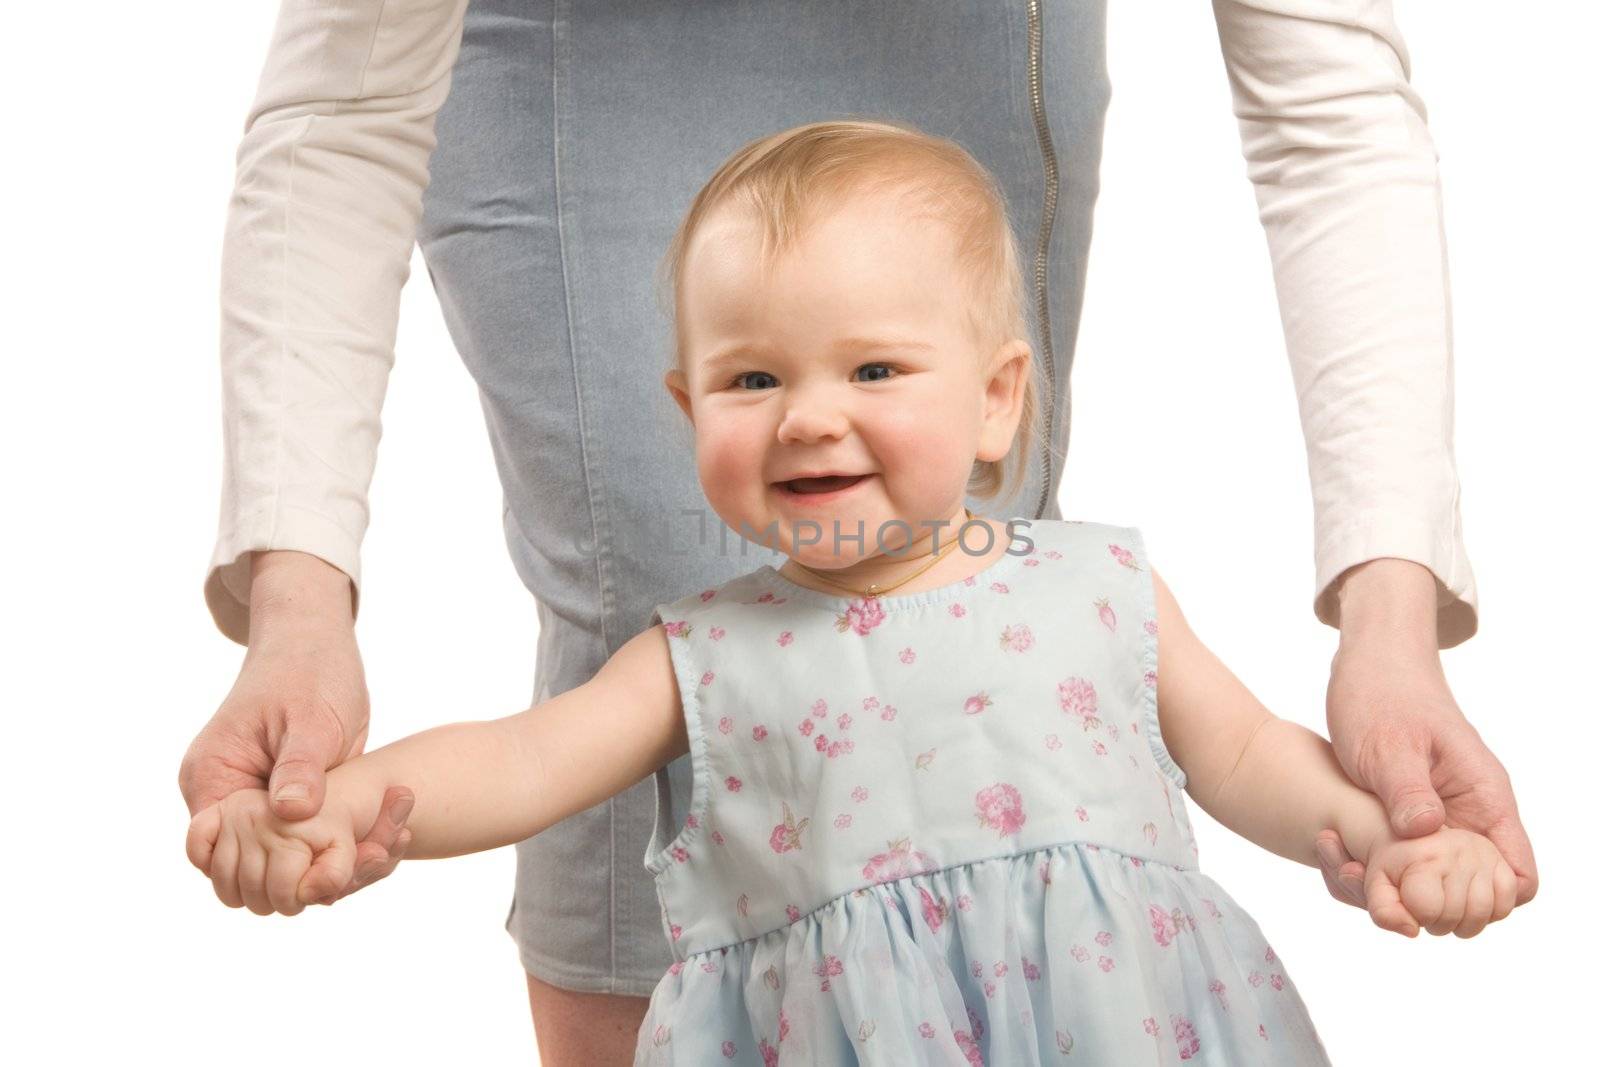 The smiling little girl in a blue dress hold on mum's hands and tries to go
